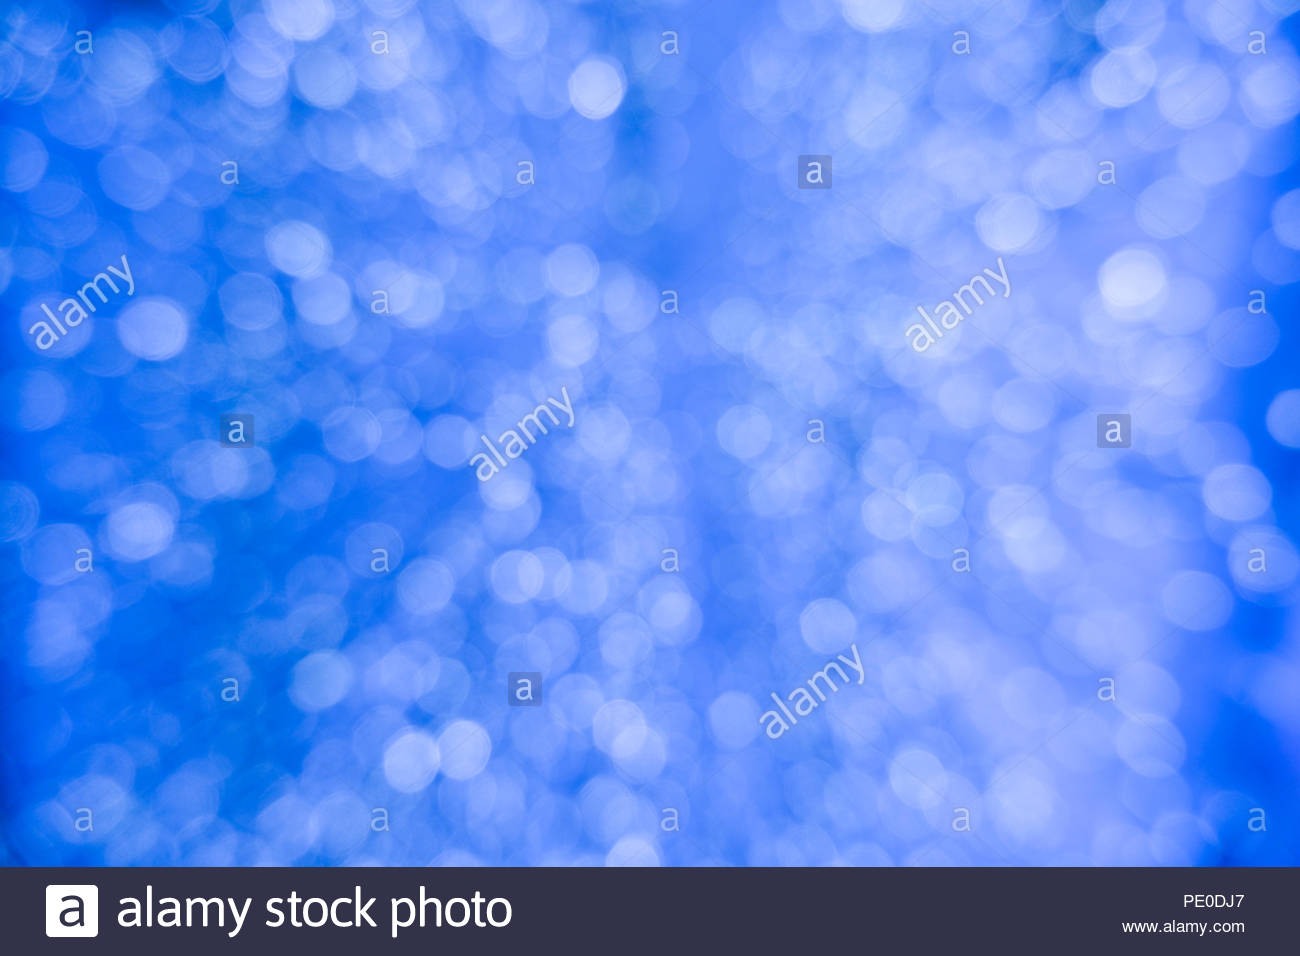 Abstract Blue Bokeh Circles For Christmas Background Royalty High